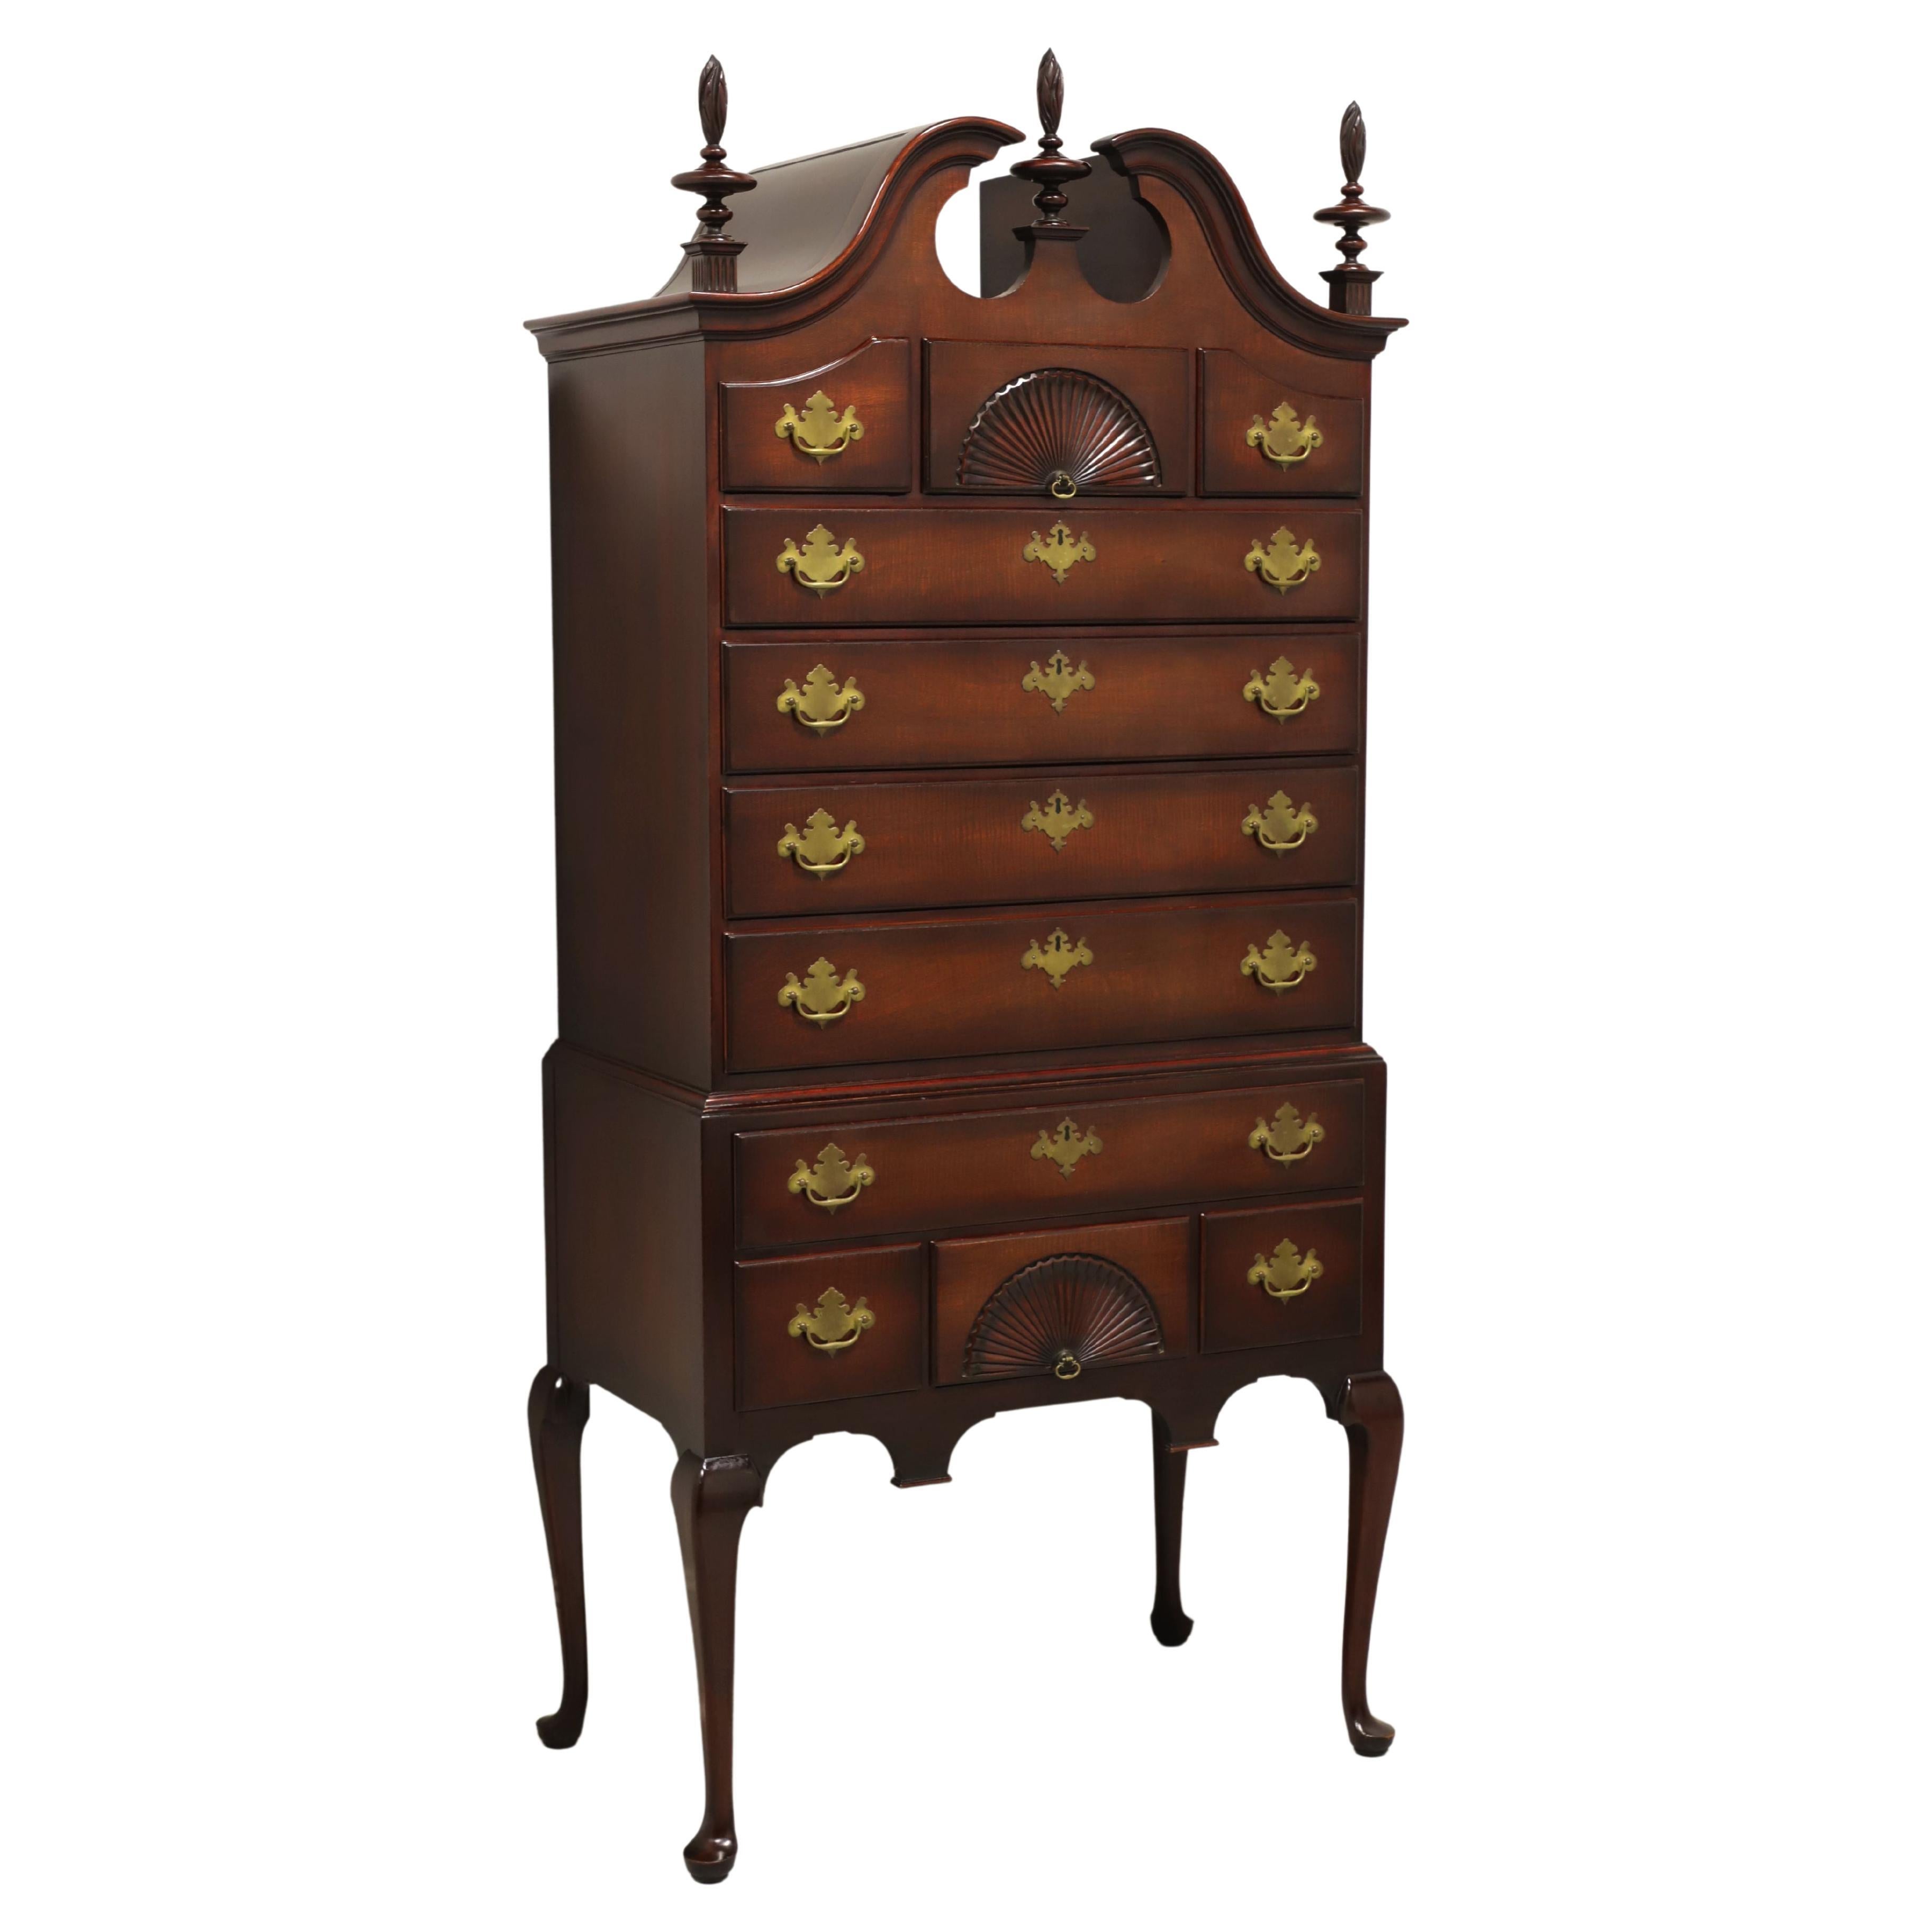 What furniture style is the Queen Anne highboy?